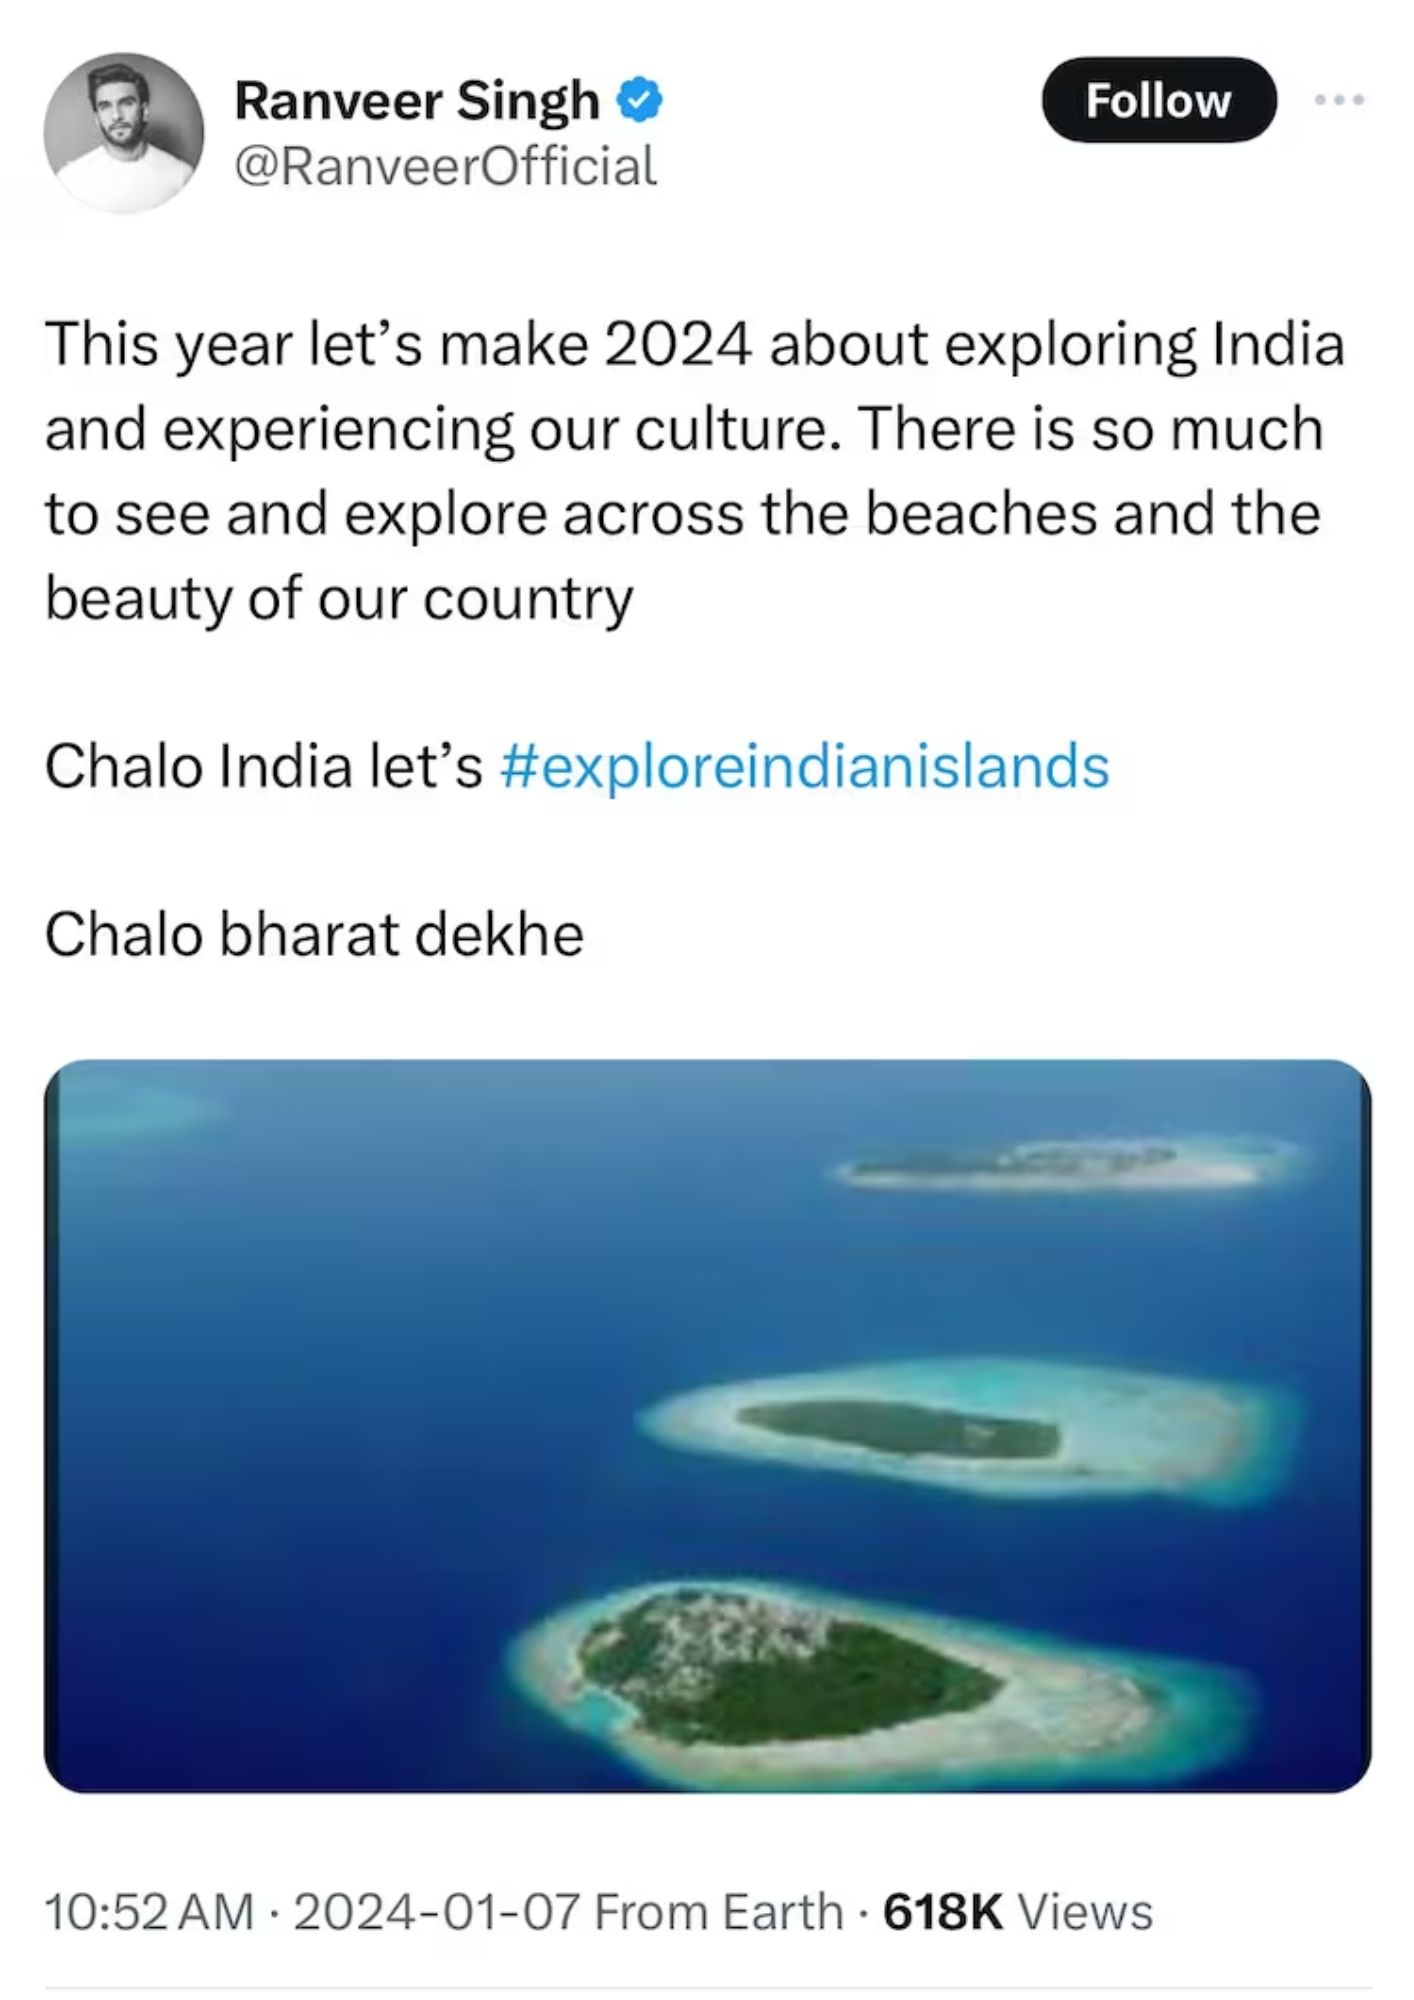 Ranveer Singh Posts Maldives Pic On ‘X’ While Promoting Lakshadweep, Deletes It Later